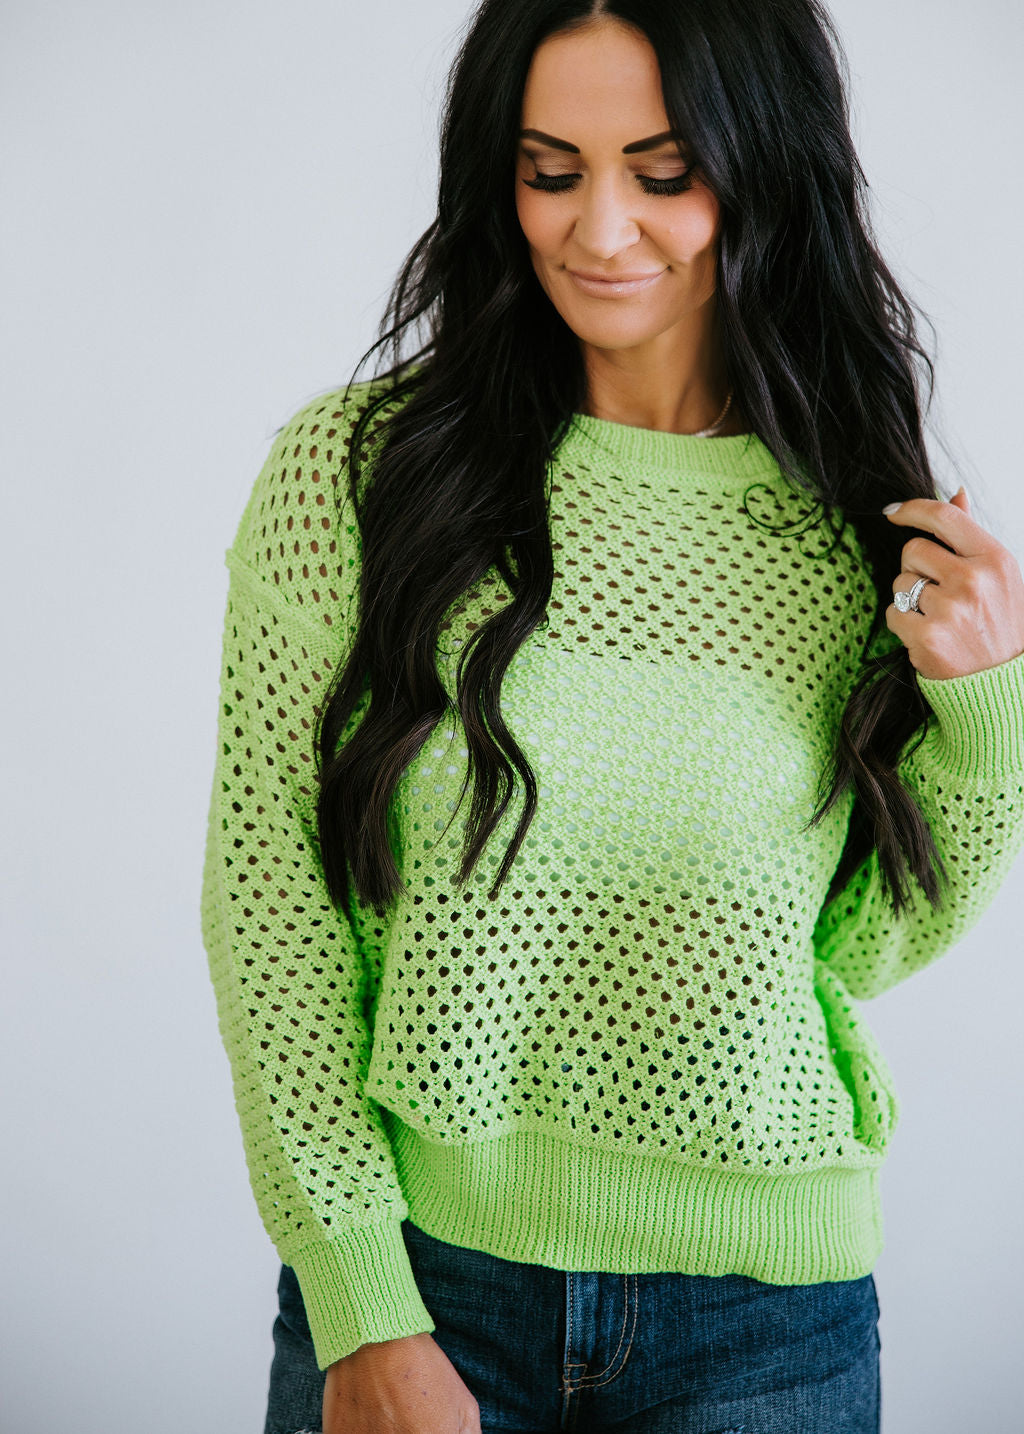 SHINY POINTELLE KNIT SWEATER - Light lime green